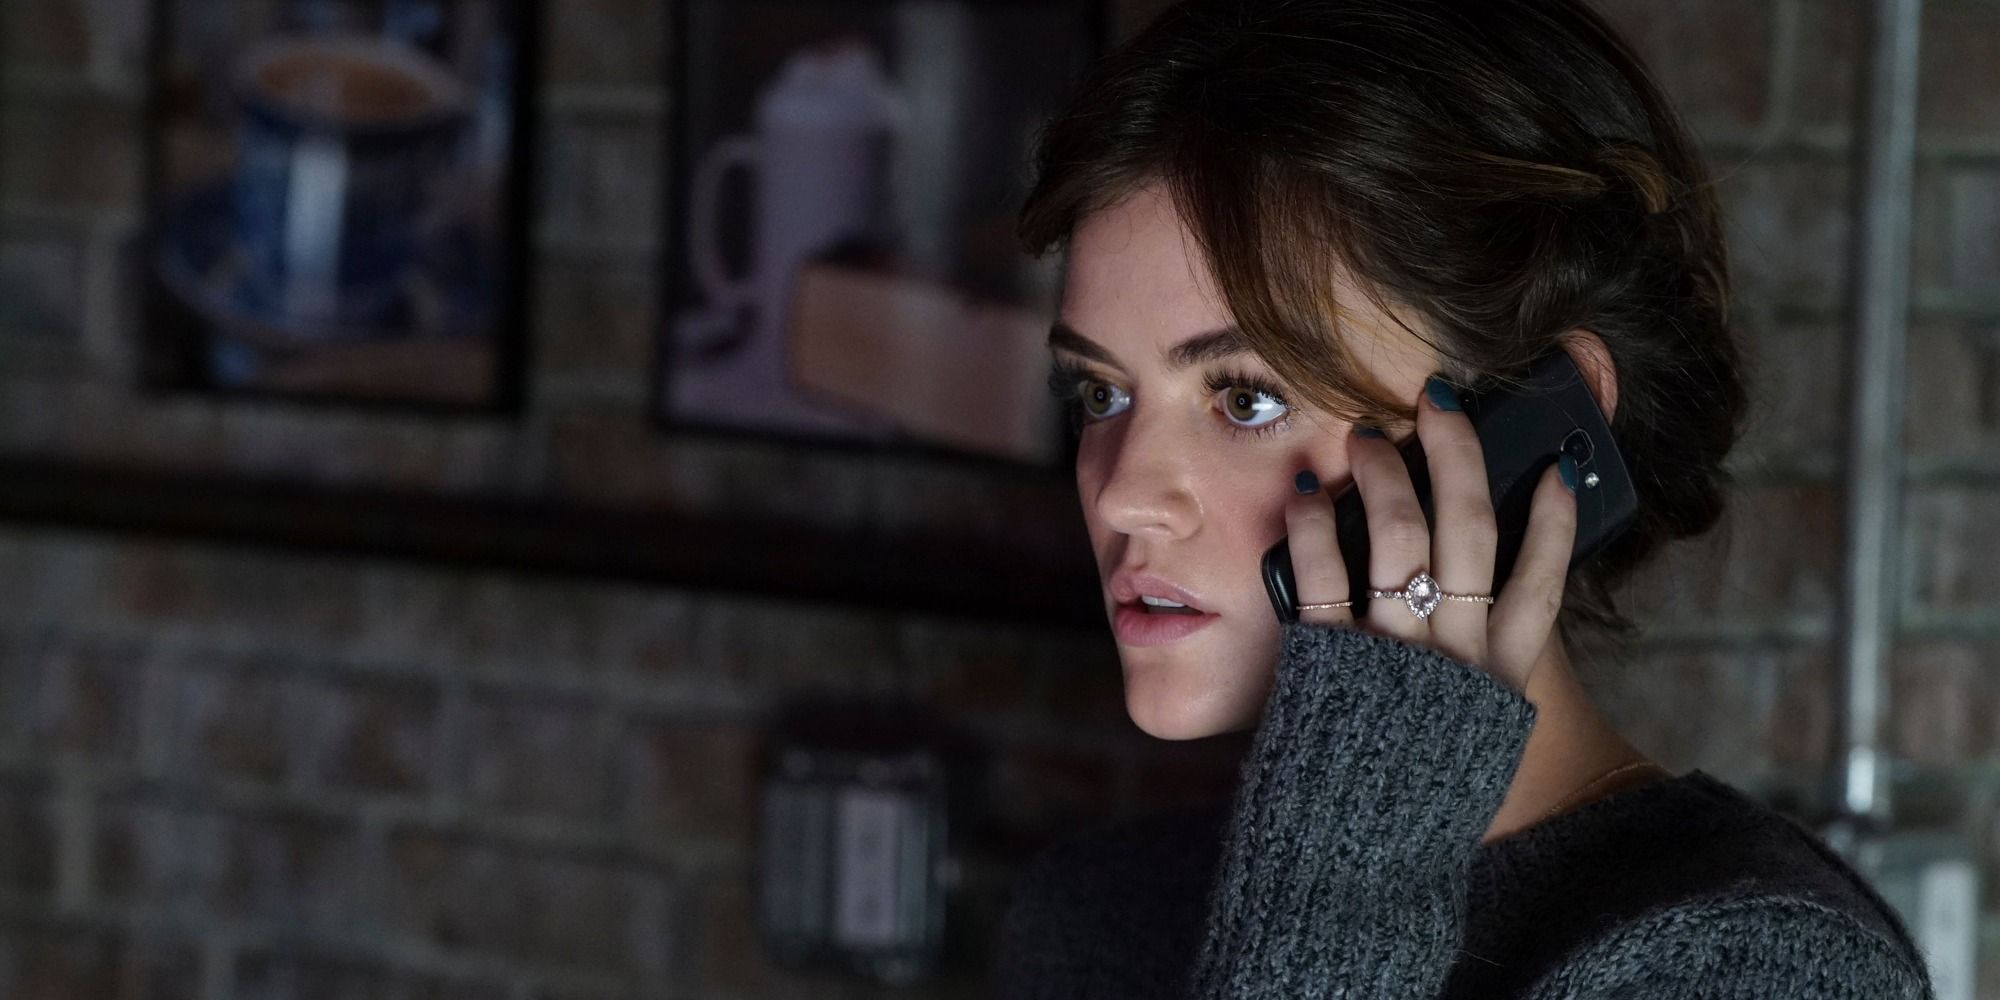 Lucy Hale as Aria talking on the phone on Pretty Little Liars